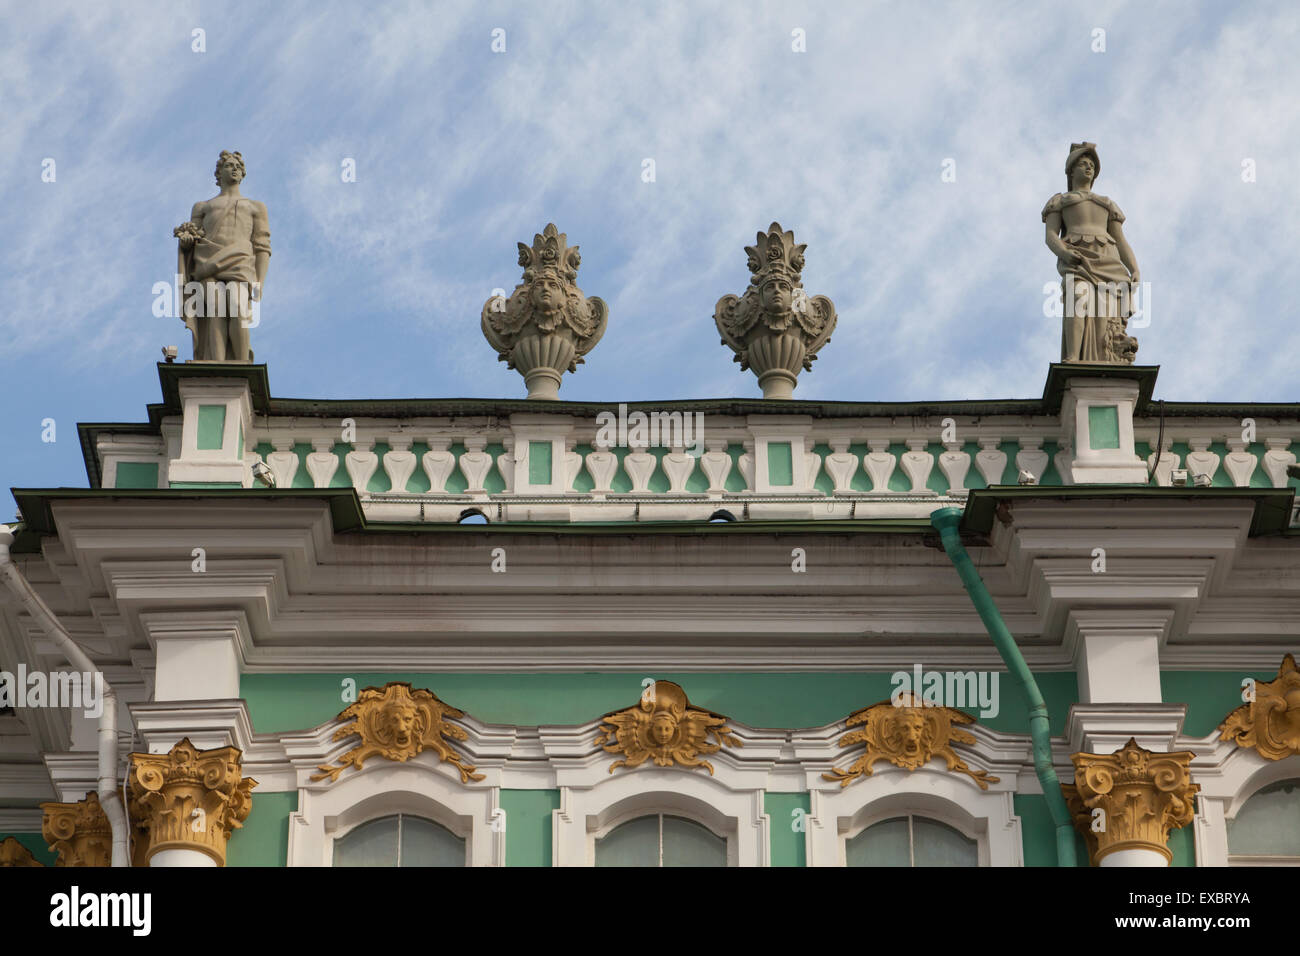 The State Hermitage, St. Petersburg, Russia. Stock Photo